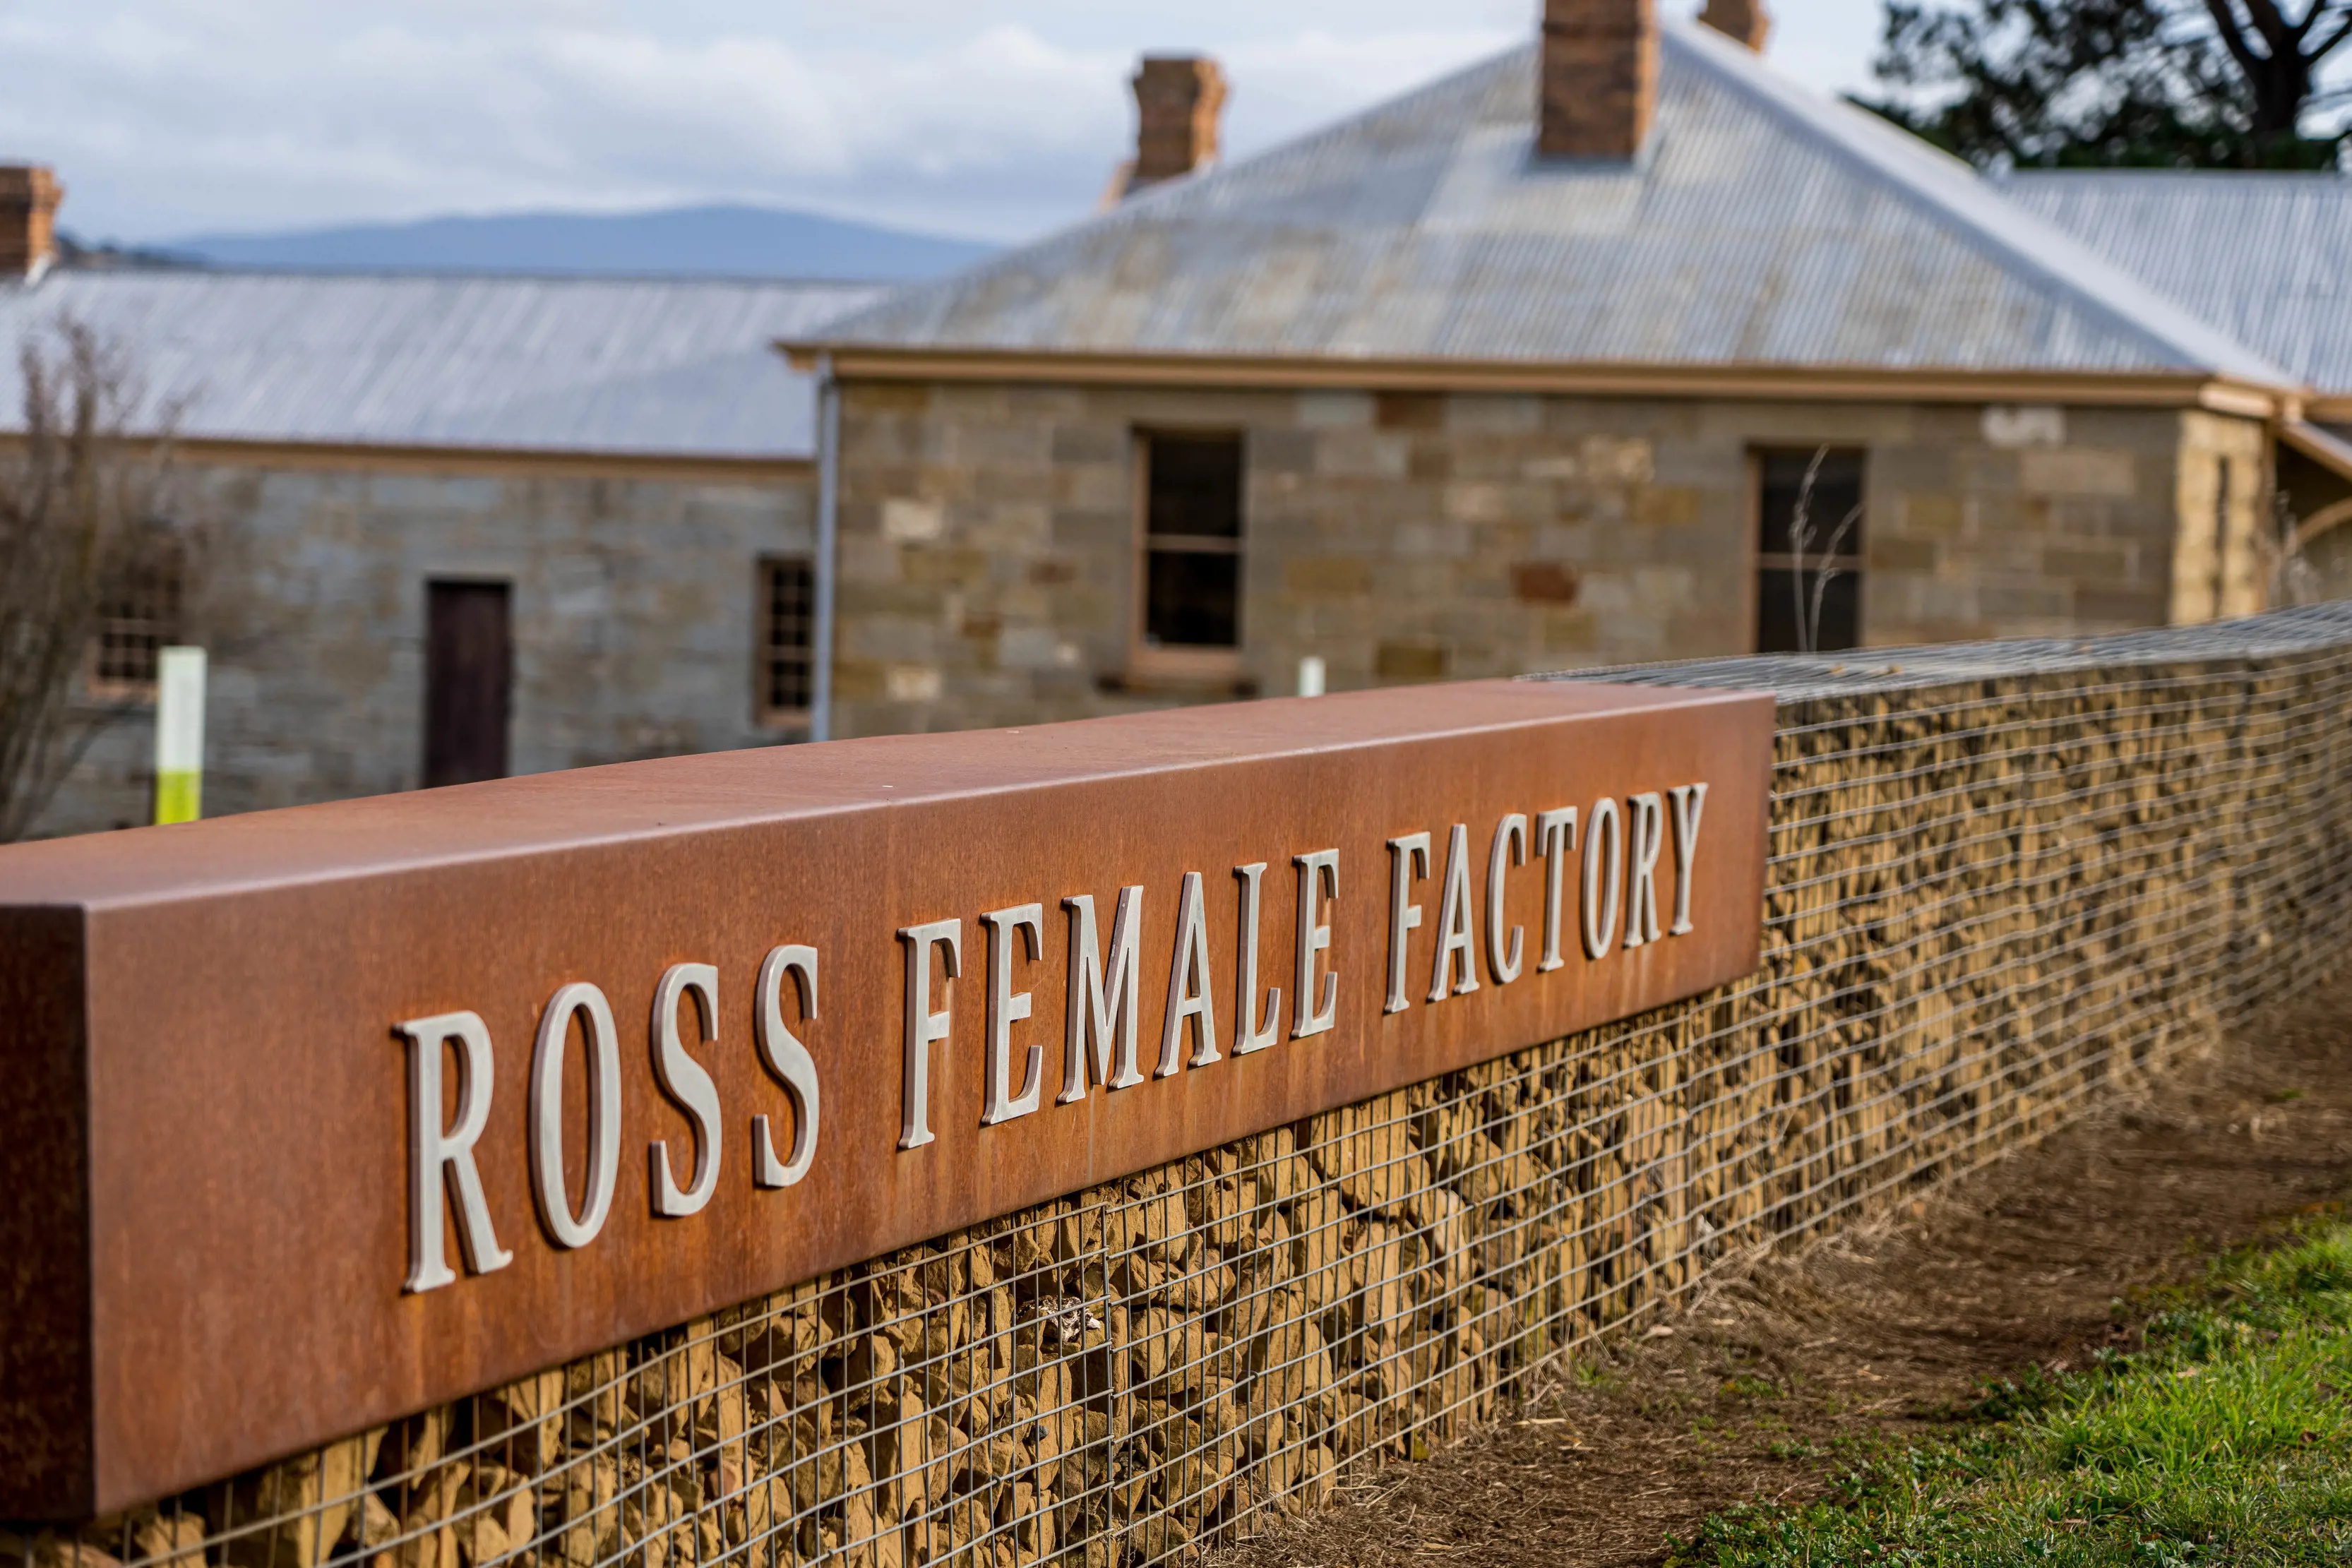 Ross Female Factory signanage.